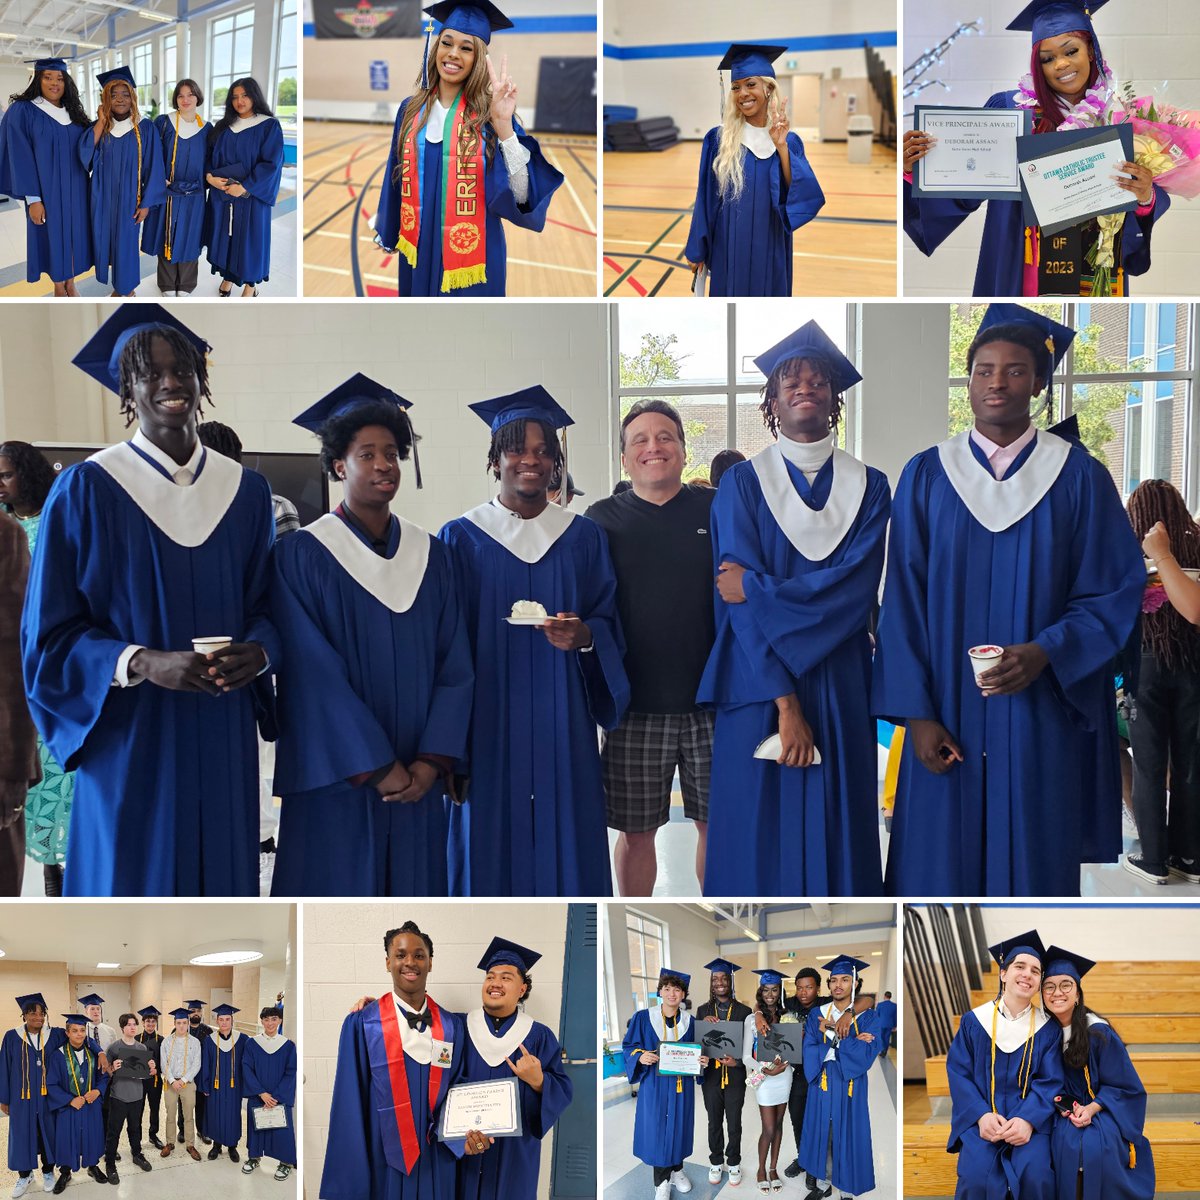 Congratulations to these ND Eagles! 🎓 
You did it! 🙌🏾  
We are so proud of you! ❤️ 
Time to spread your wings and fly! 🦅

Watch 👀👇
bitly.ws/K6PZ

#ThisisND #APlaceforEveryone #ocsbJoy #ocsbBeCommunity #Classof2023 @OttCatholicSB @MrJPCloutier